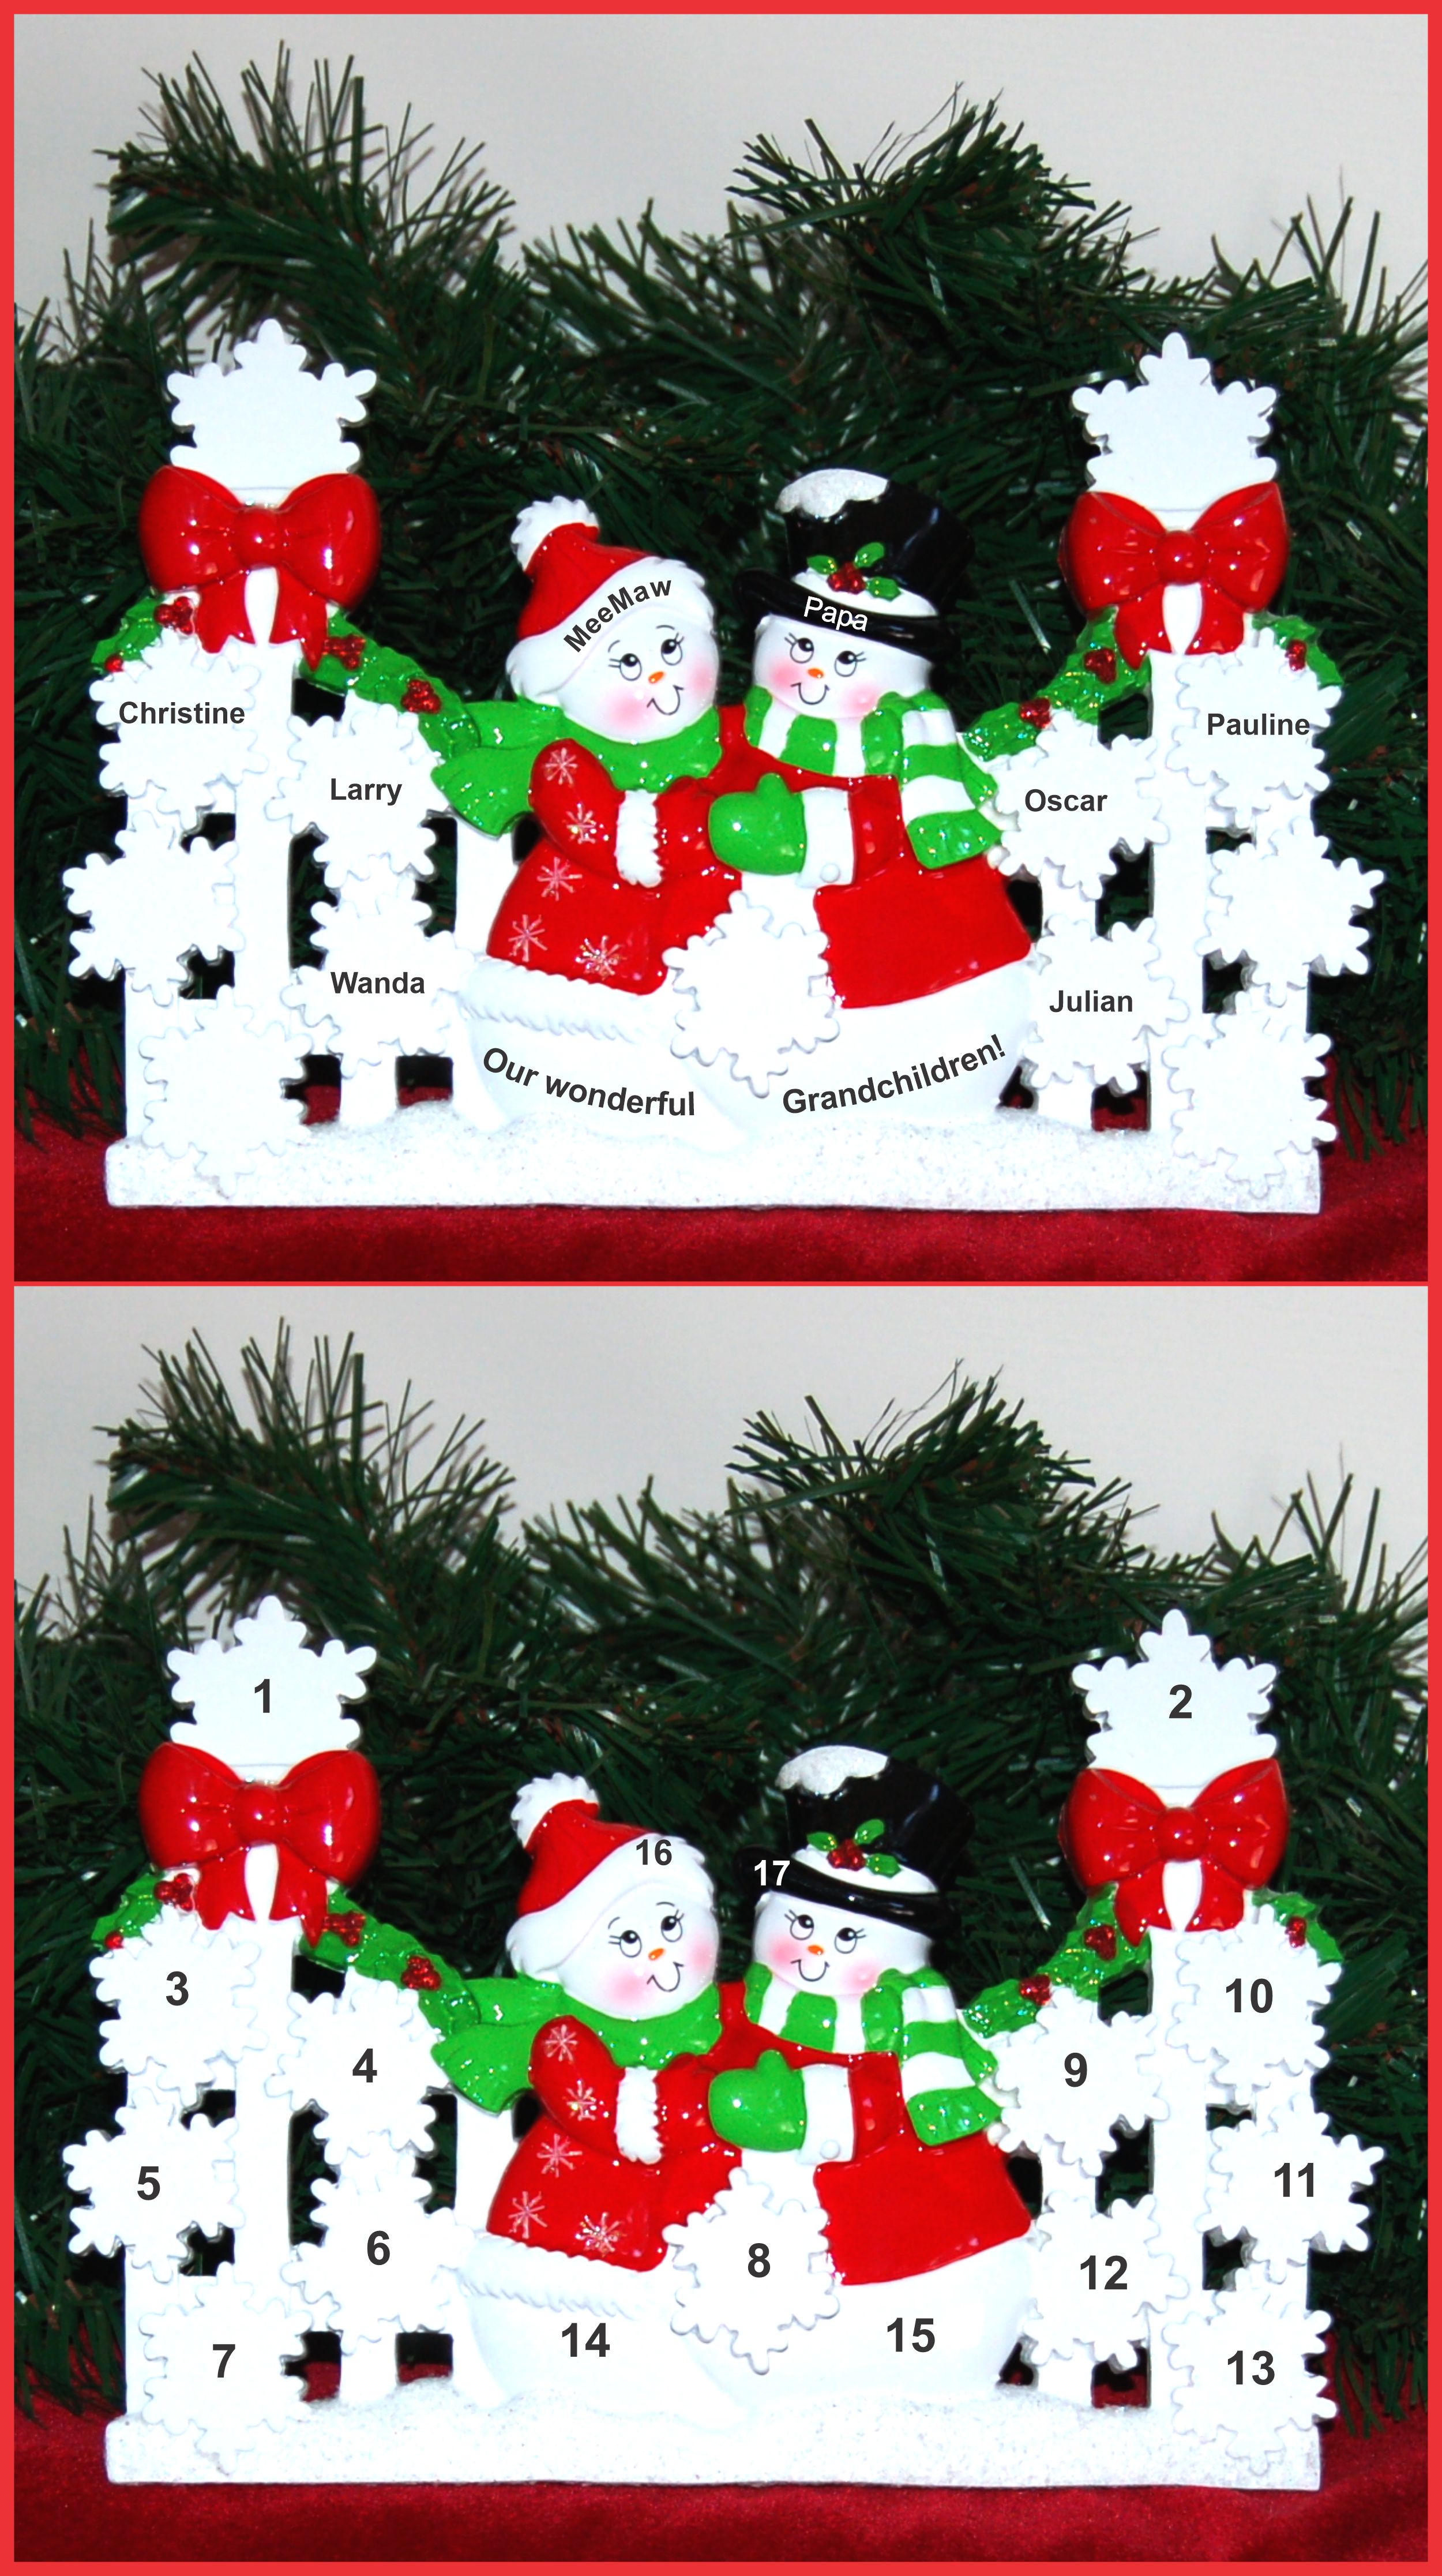 Personalized Grandparents Tabletop Christmas Decoration Snowflakes for 6 Grandchildren by Russell Rhodes